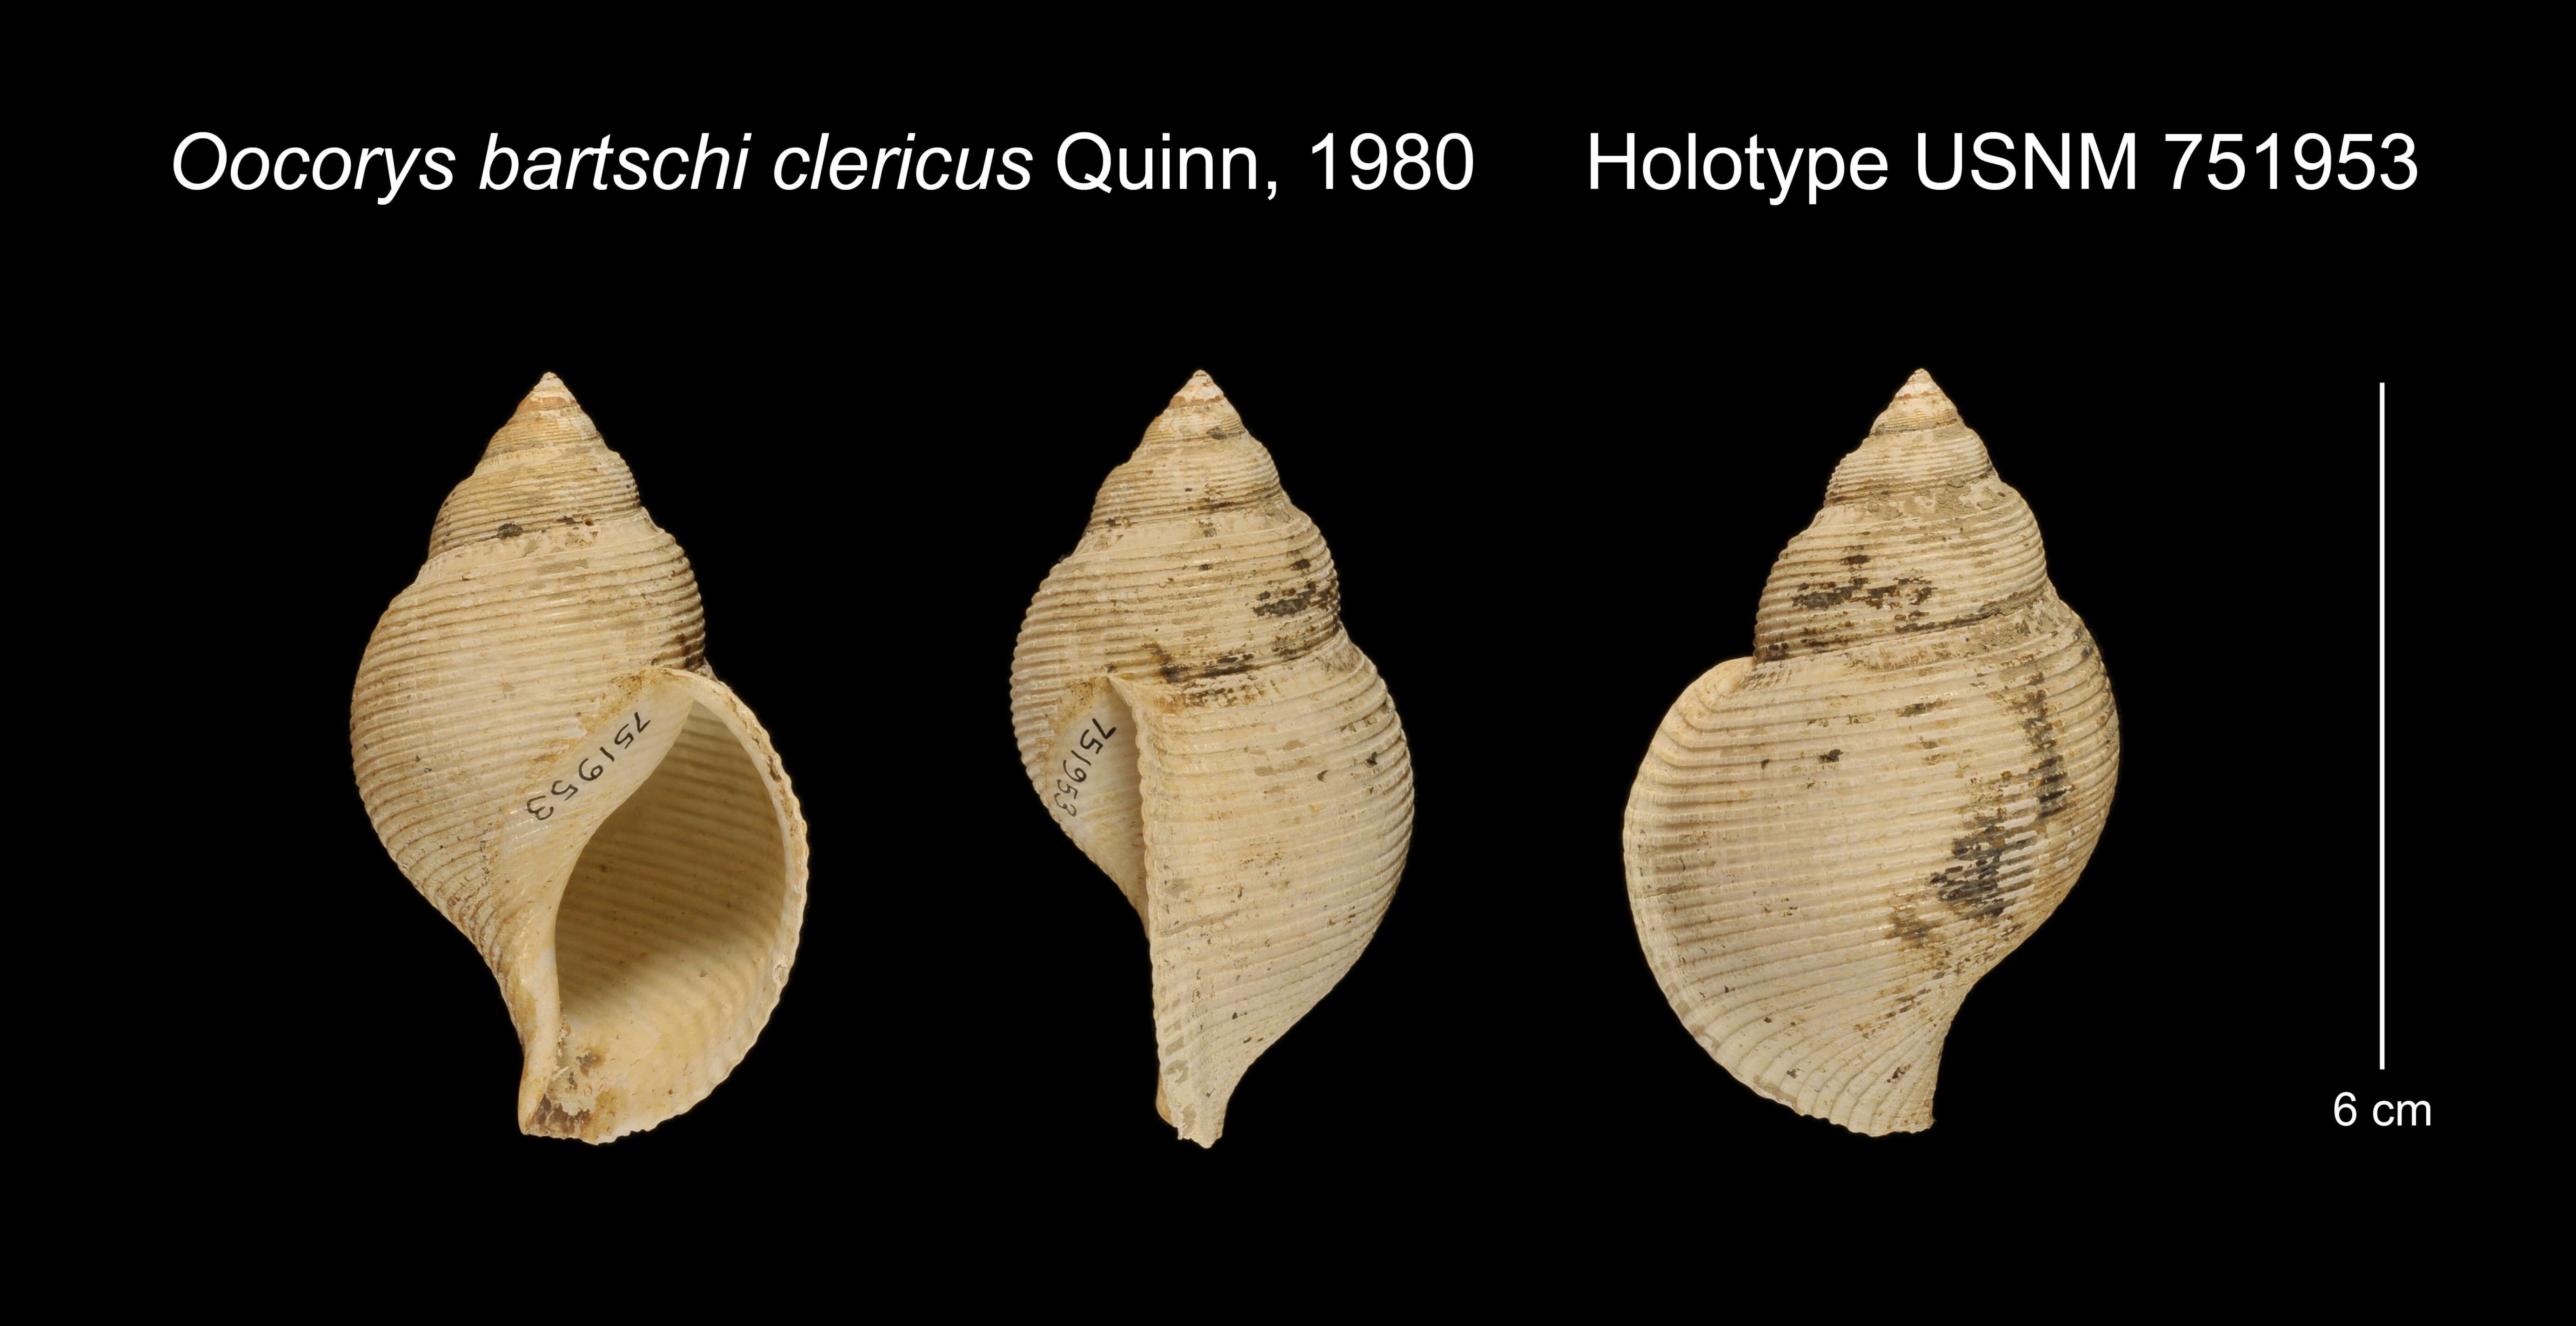 Image of Oocorys clericus Quinn 1980